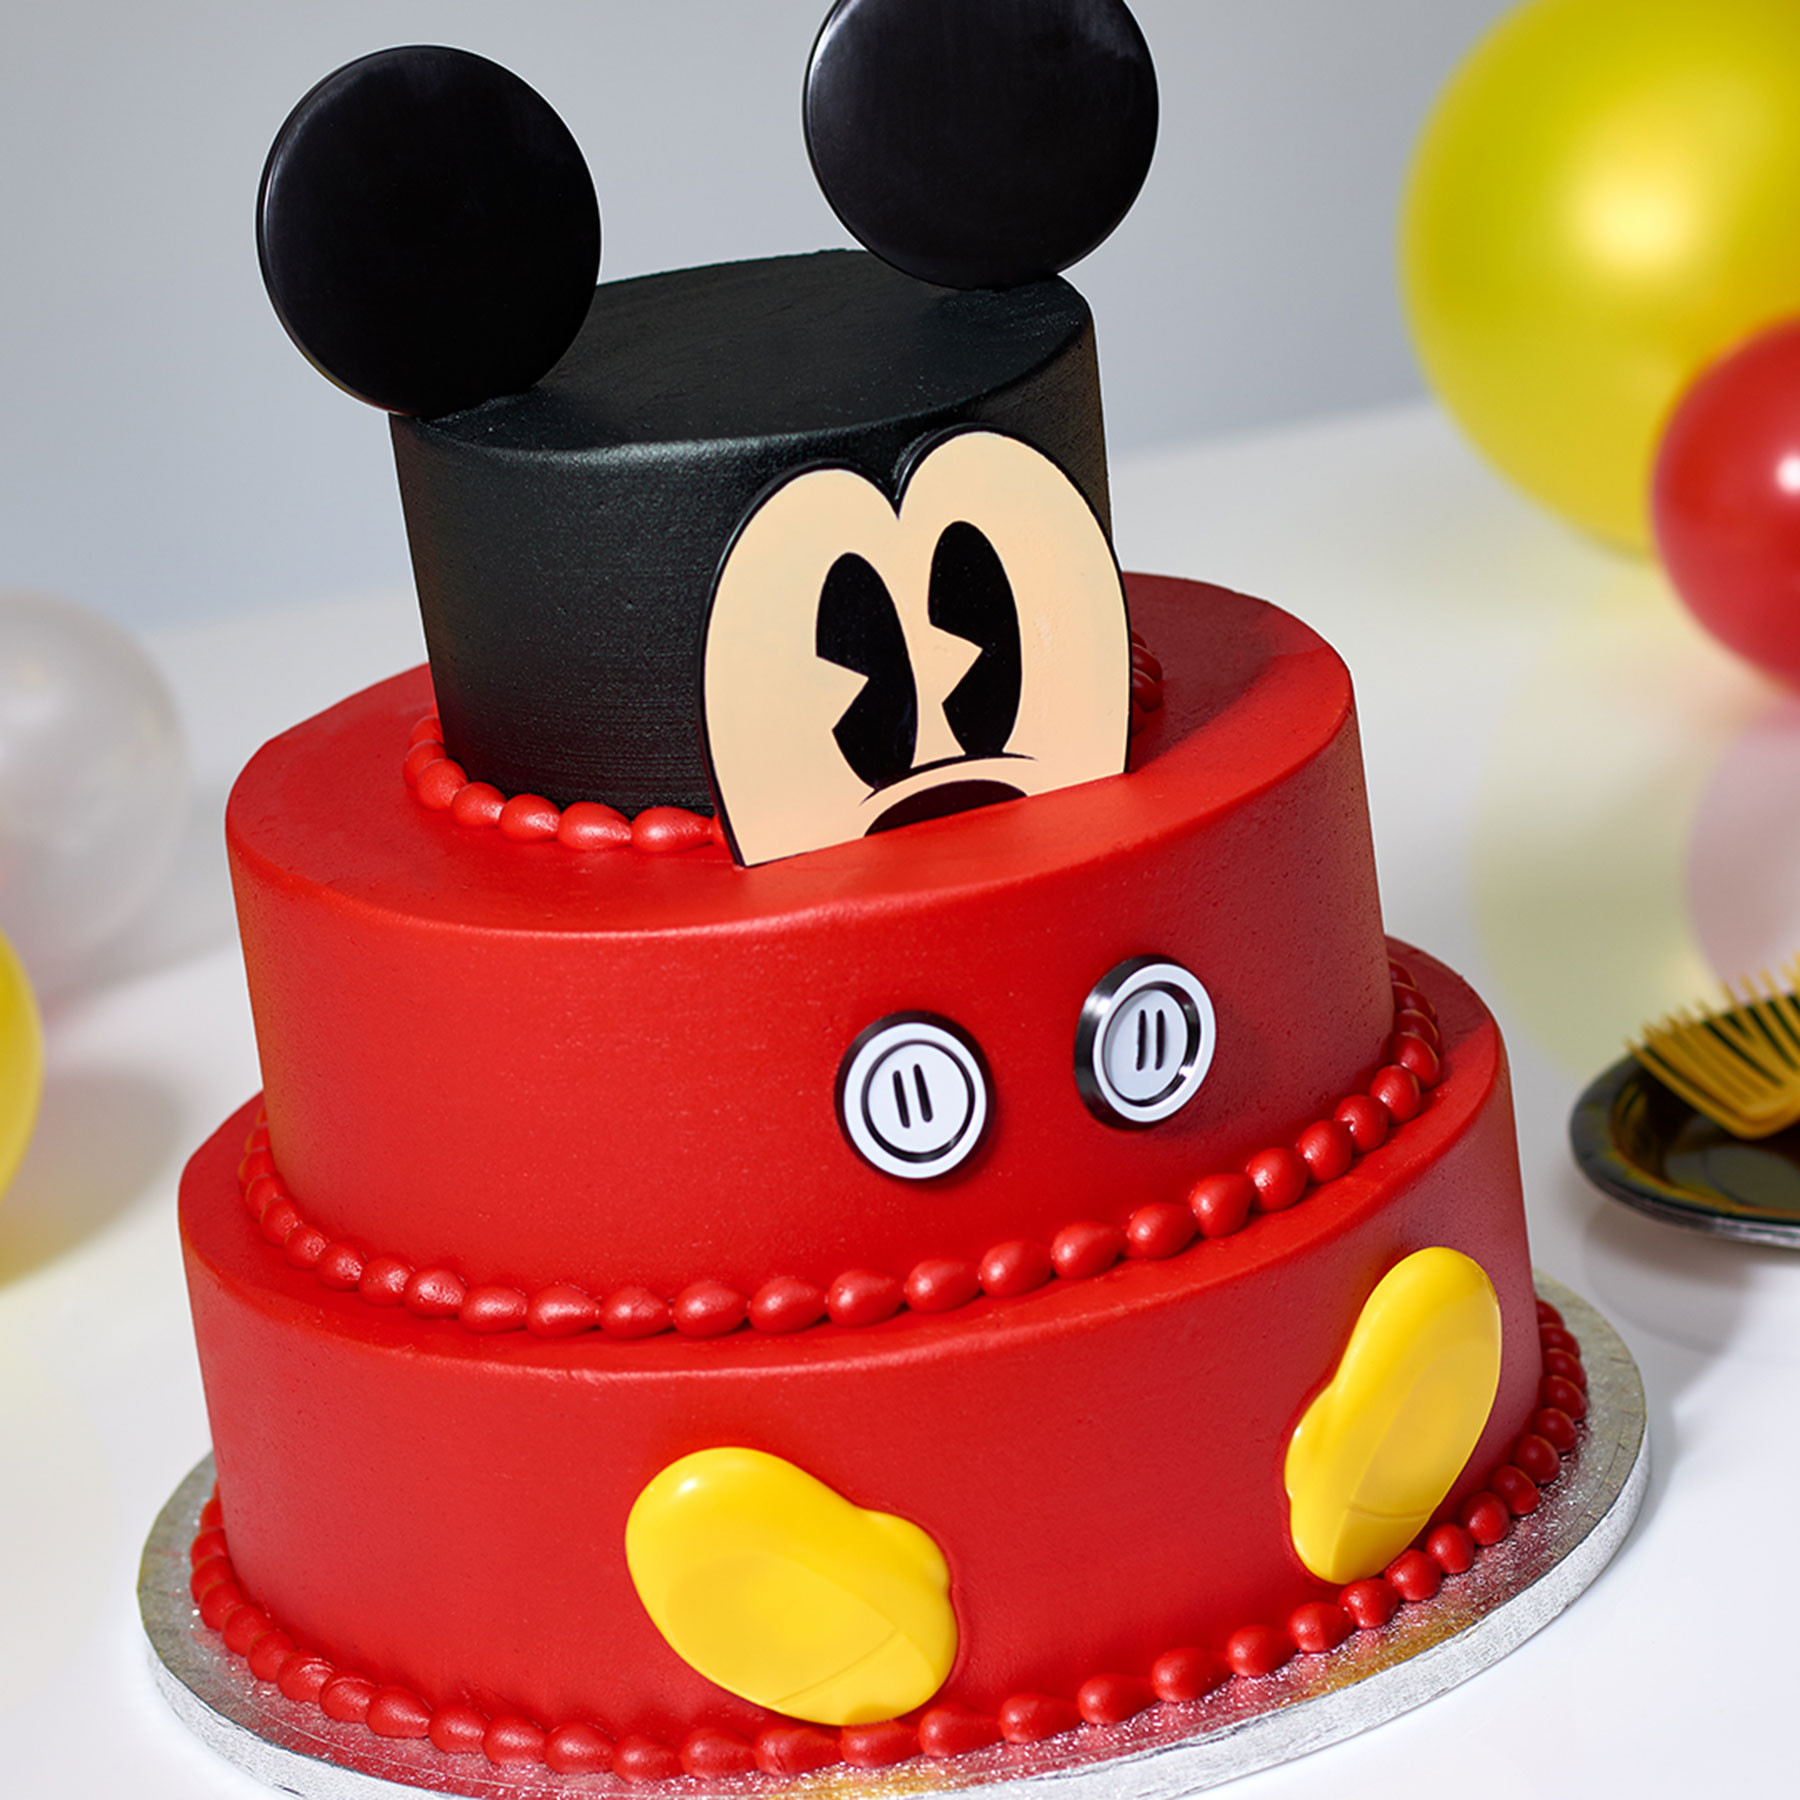 Sams Club Birthday Cakes
 Sam s Club Is Selling 3 Tier Mickey Mouse Cakes for the